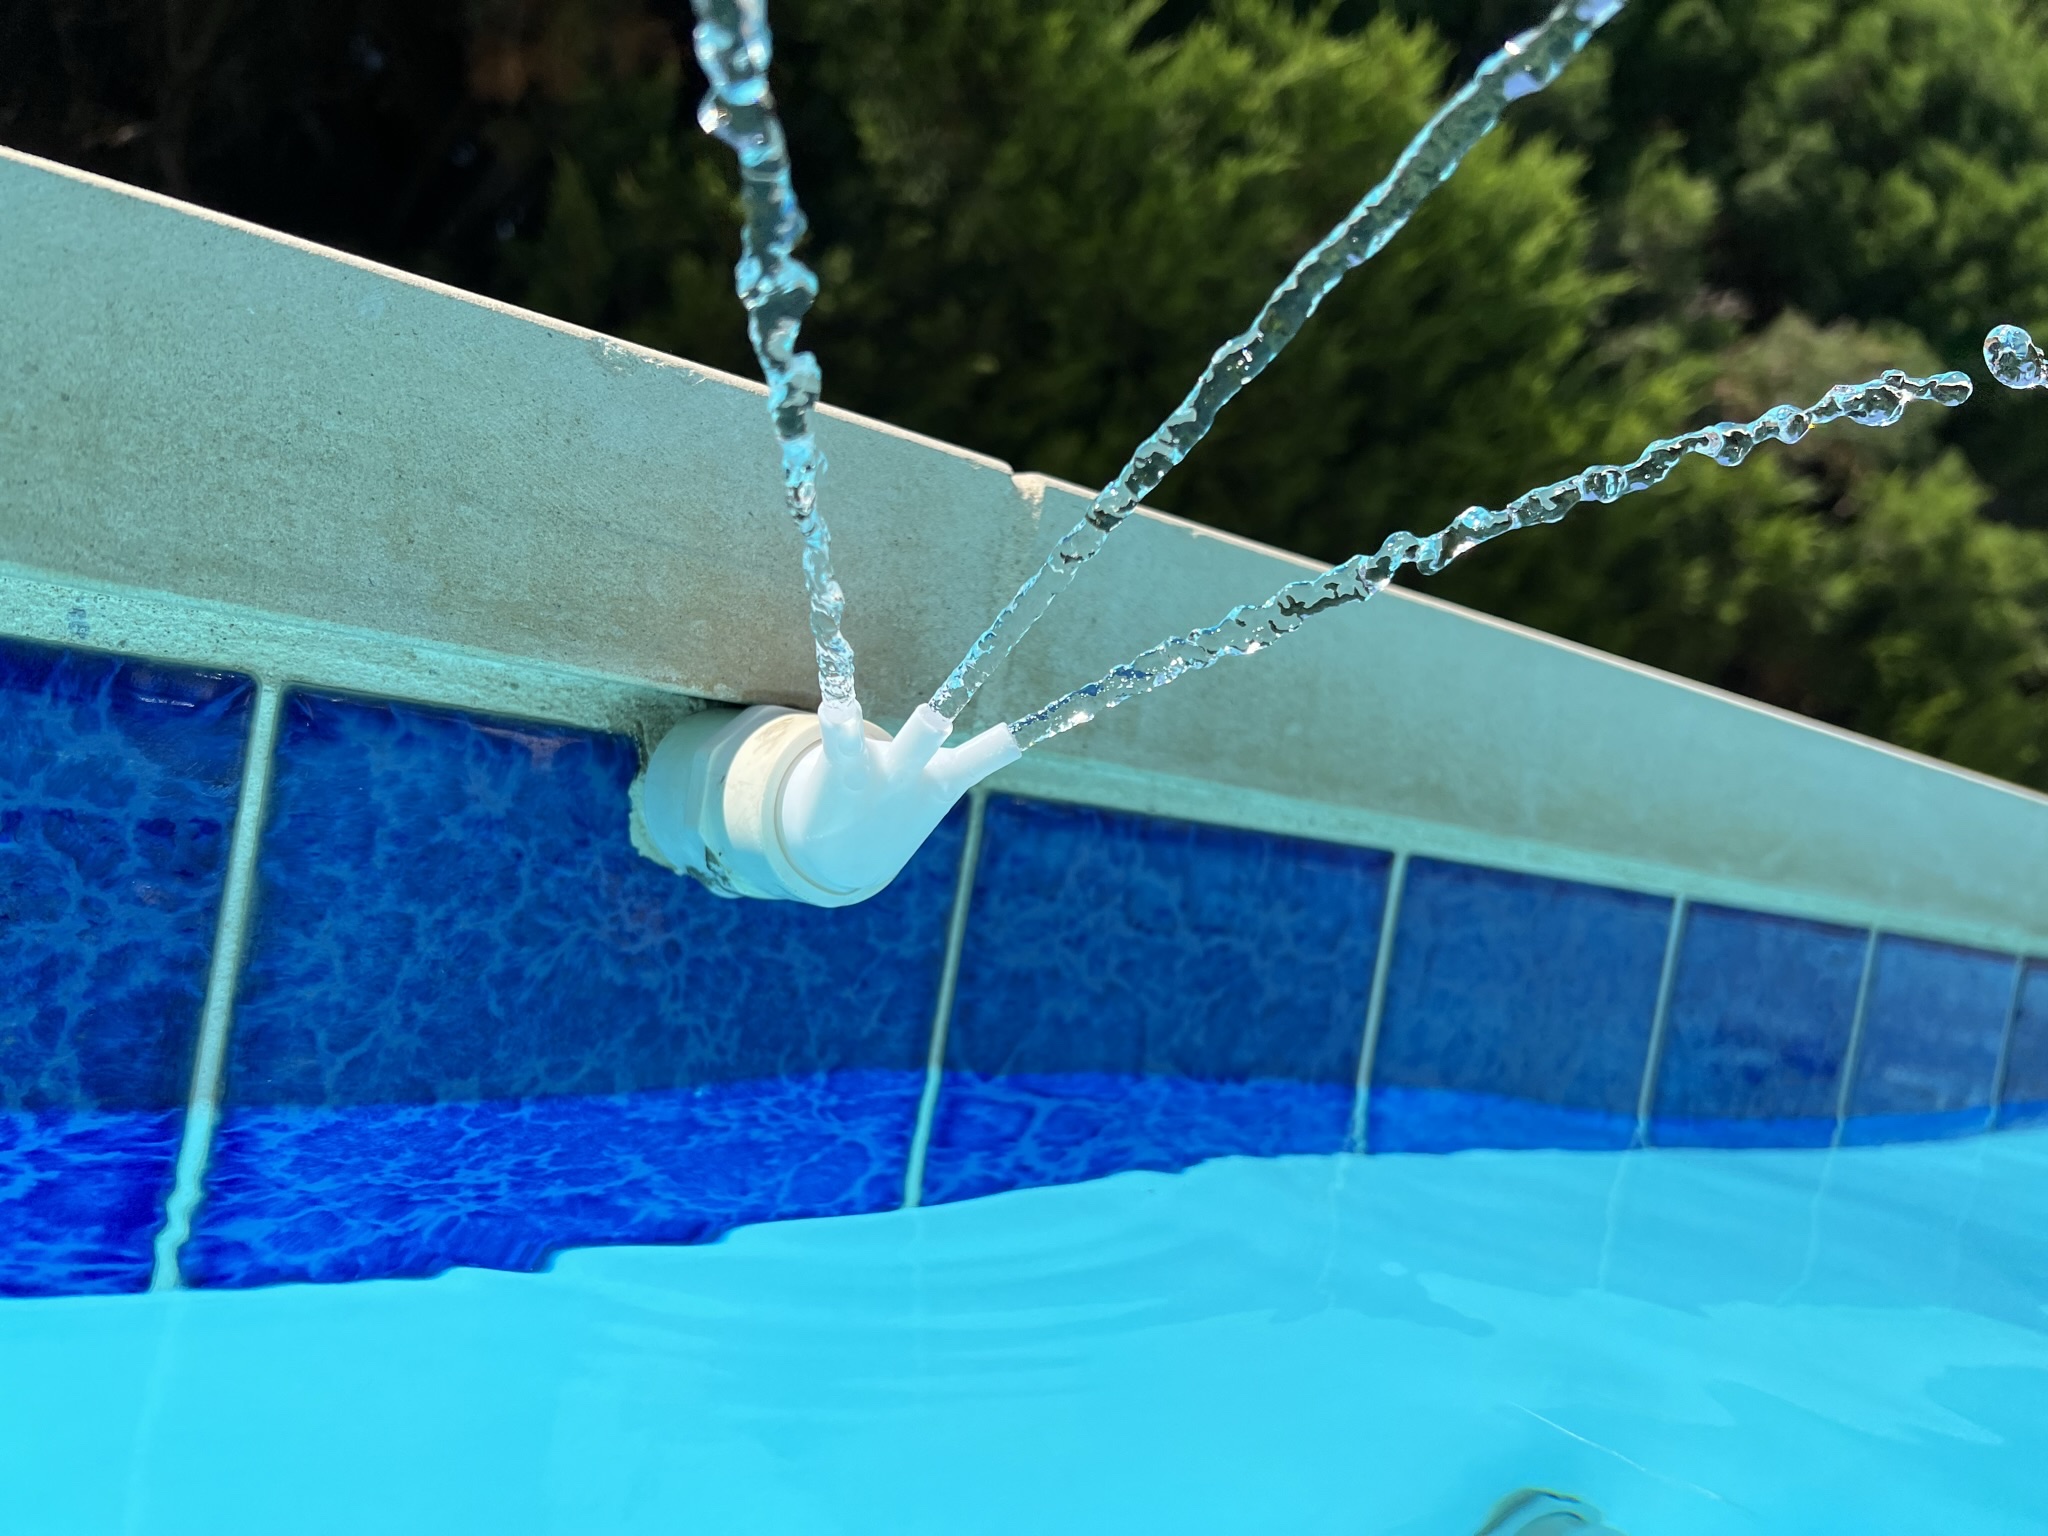 Nozzle for pool water spray